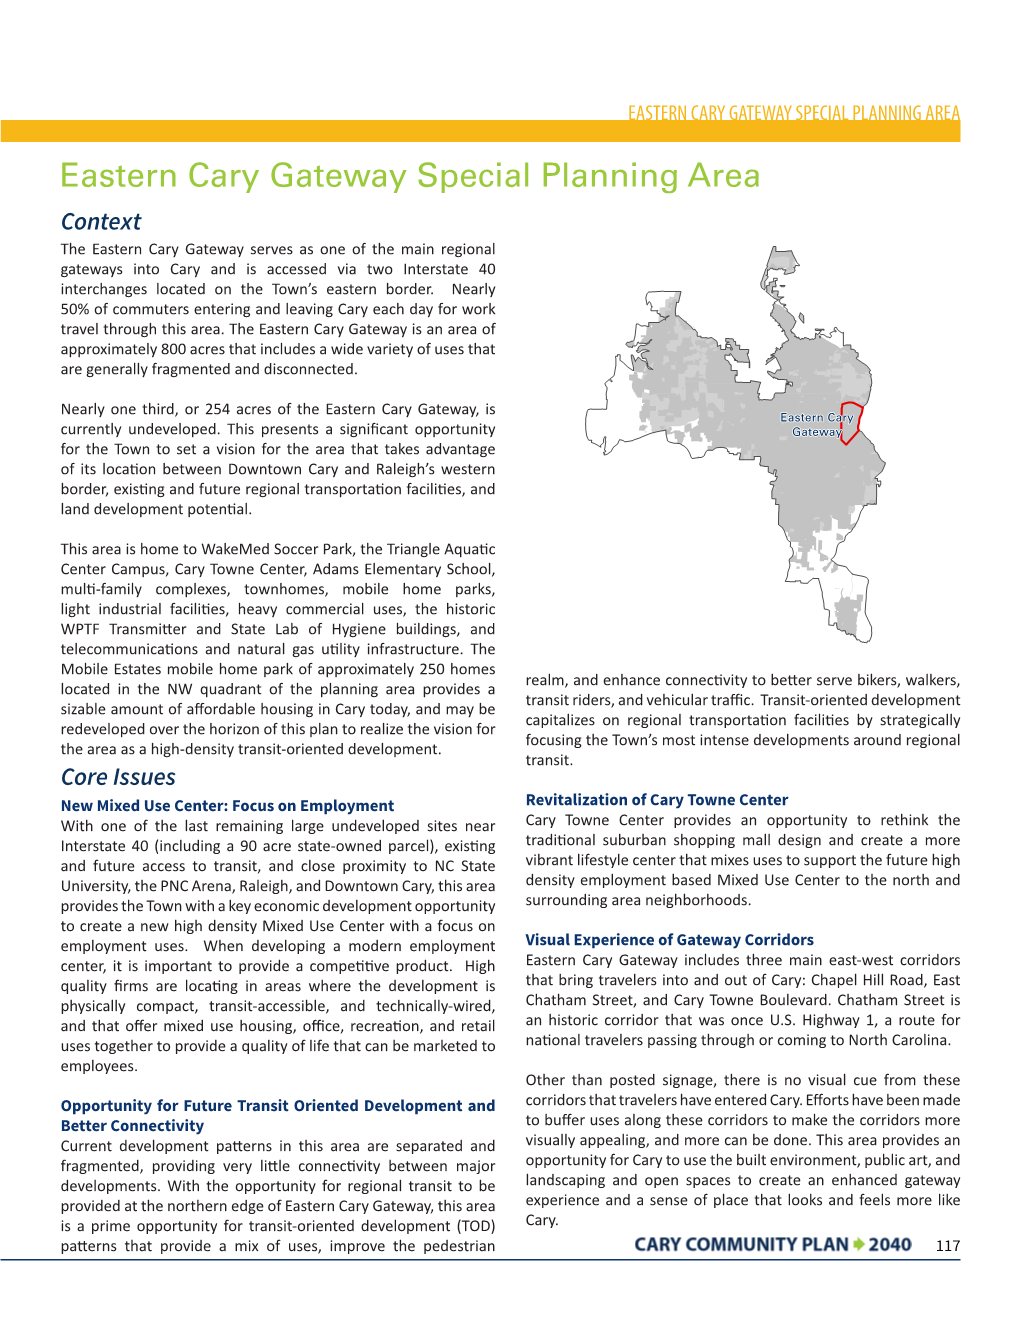 Eastern Cary Gateway Special Planning Area